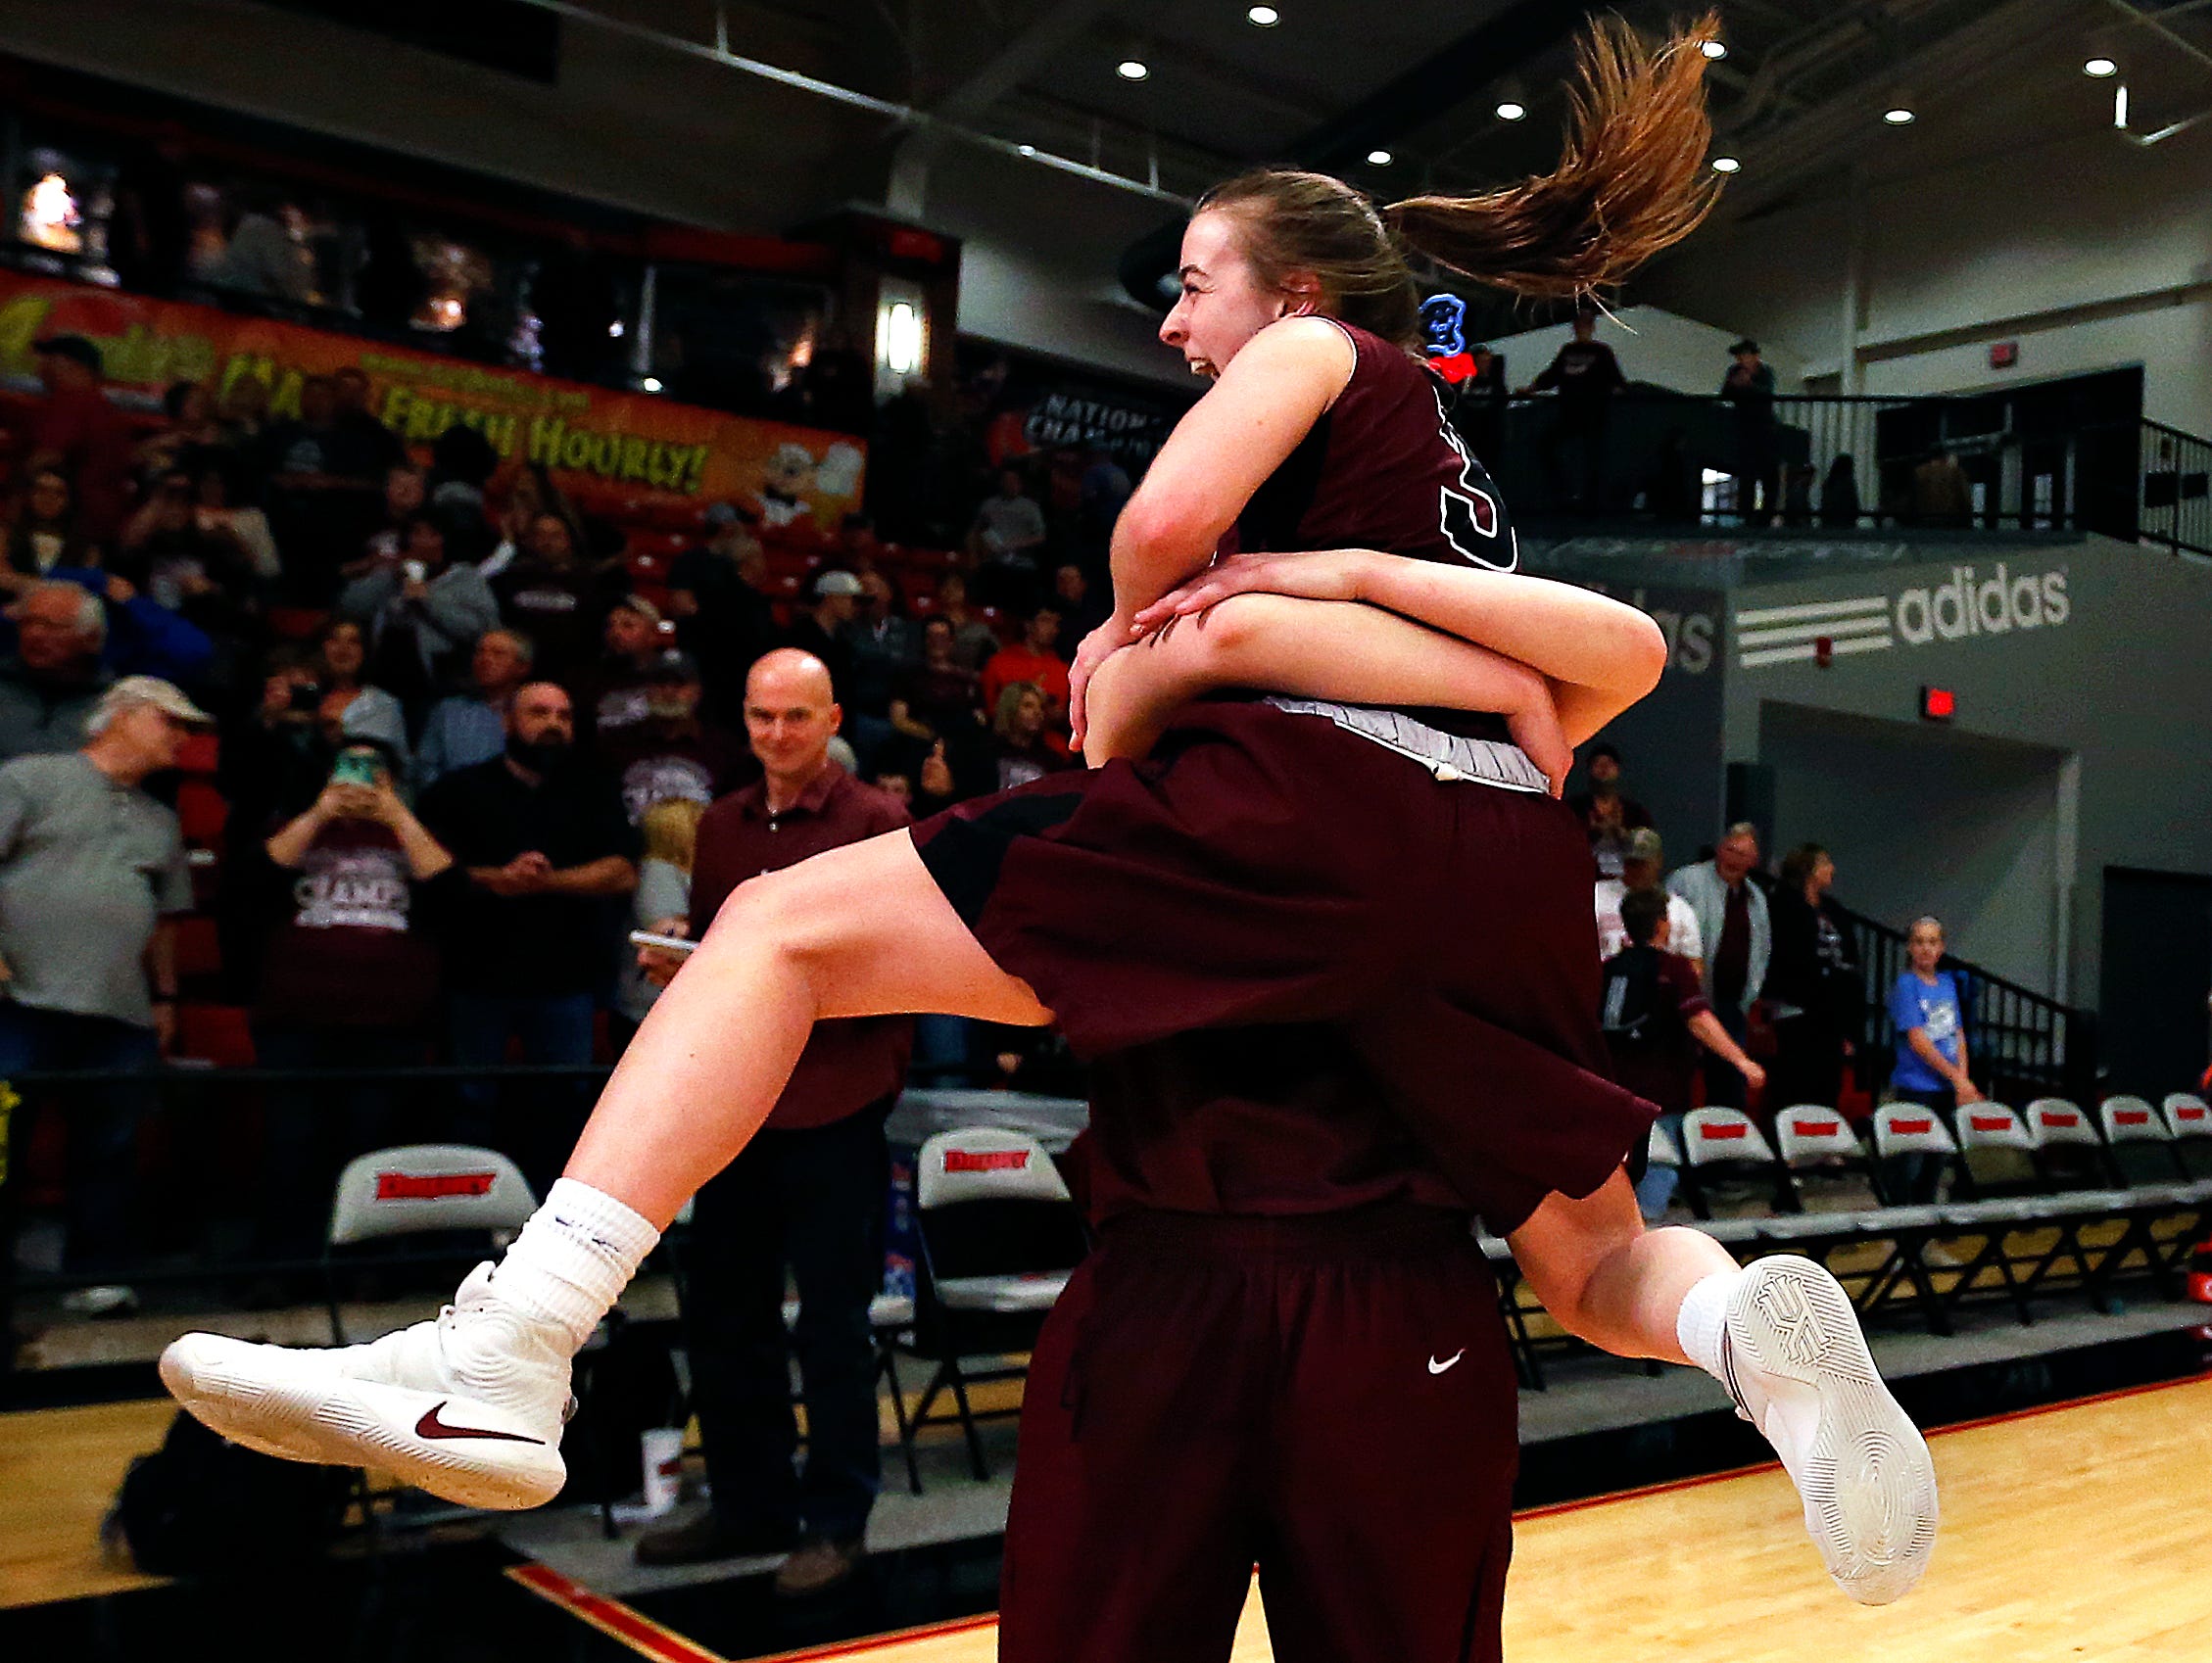 Strafford Lady Indians guard Abby Oliver (3) jumps in the arms of forward Hayley Frank (42) after the end of the MSHSAA Class 3 quarterfinal game between the Strafford High School Lady Indians and the Southern Boone High School Eagles at O'Reilly Family Event Center in Springfield, Mo. on March 4, 2017. Strafford won the game 61-34.